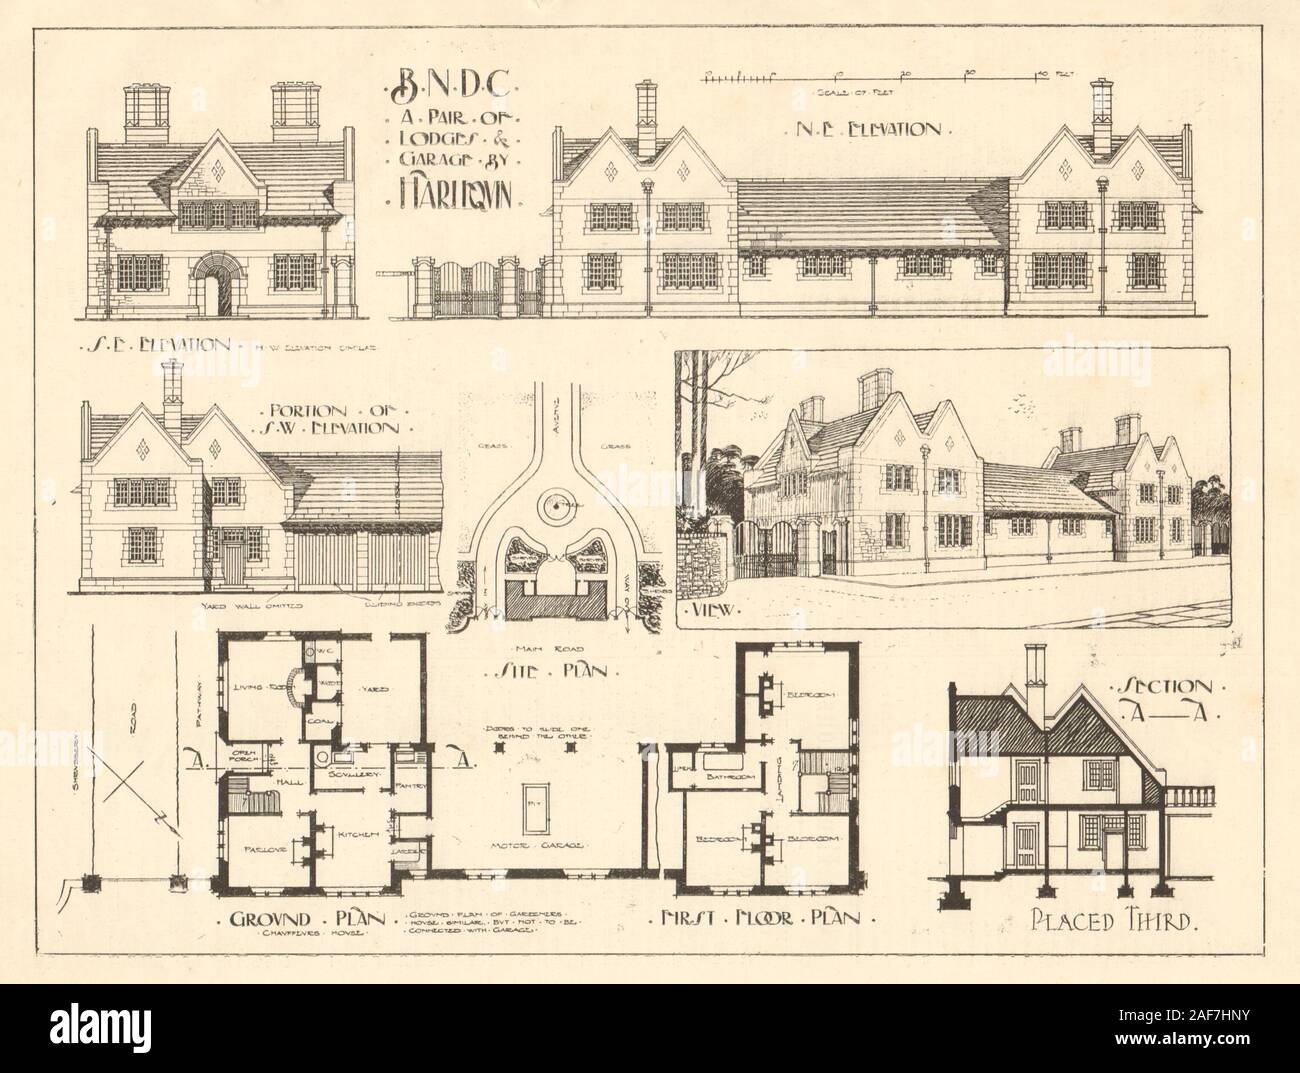 A pair of lodges & garage by Harlequin. Elevations, plans & sections 1907 Stock Photo